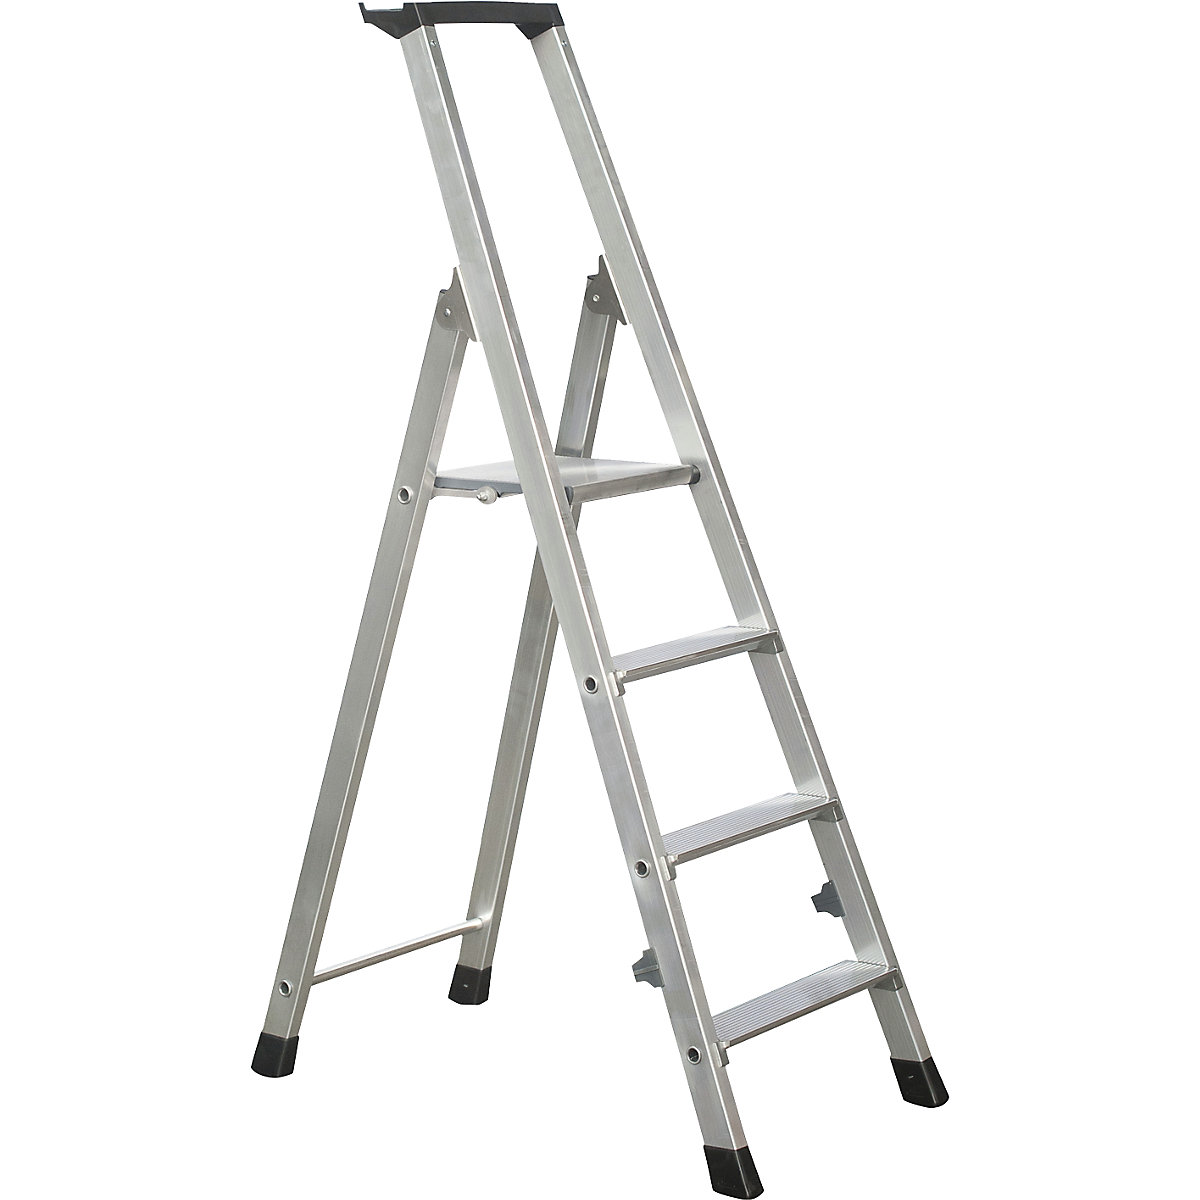 Folding step ladder, single sided access - ZARGES